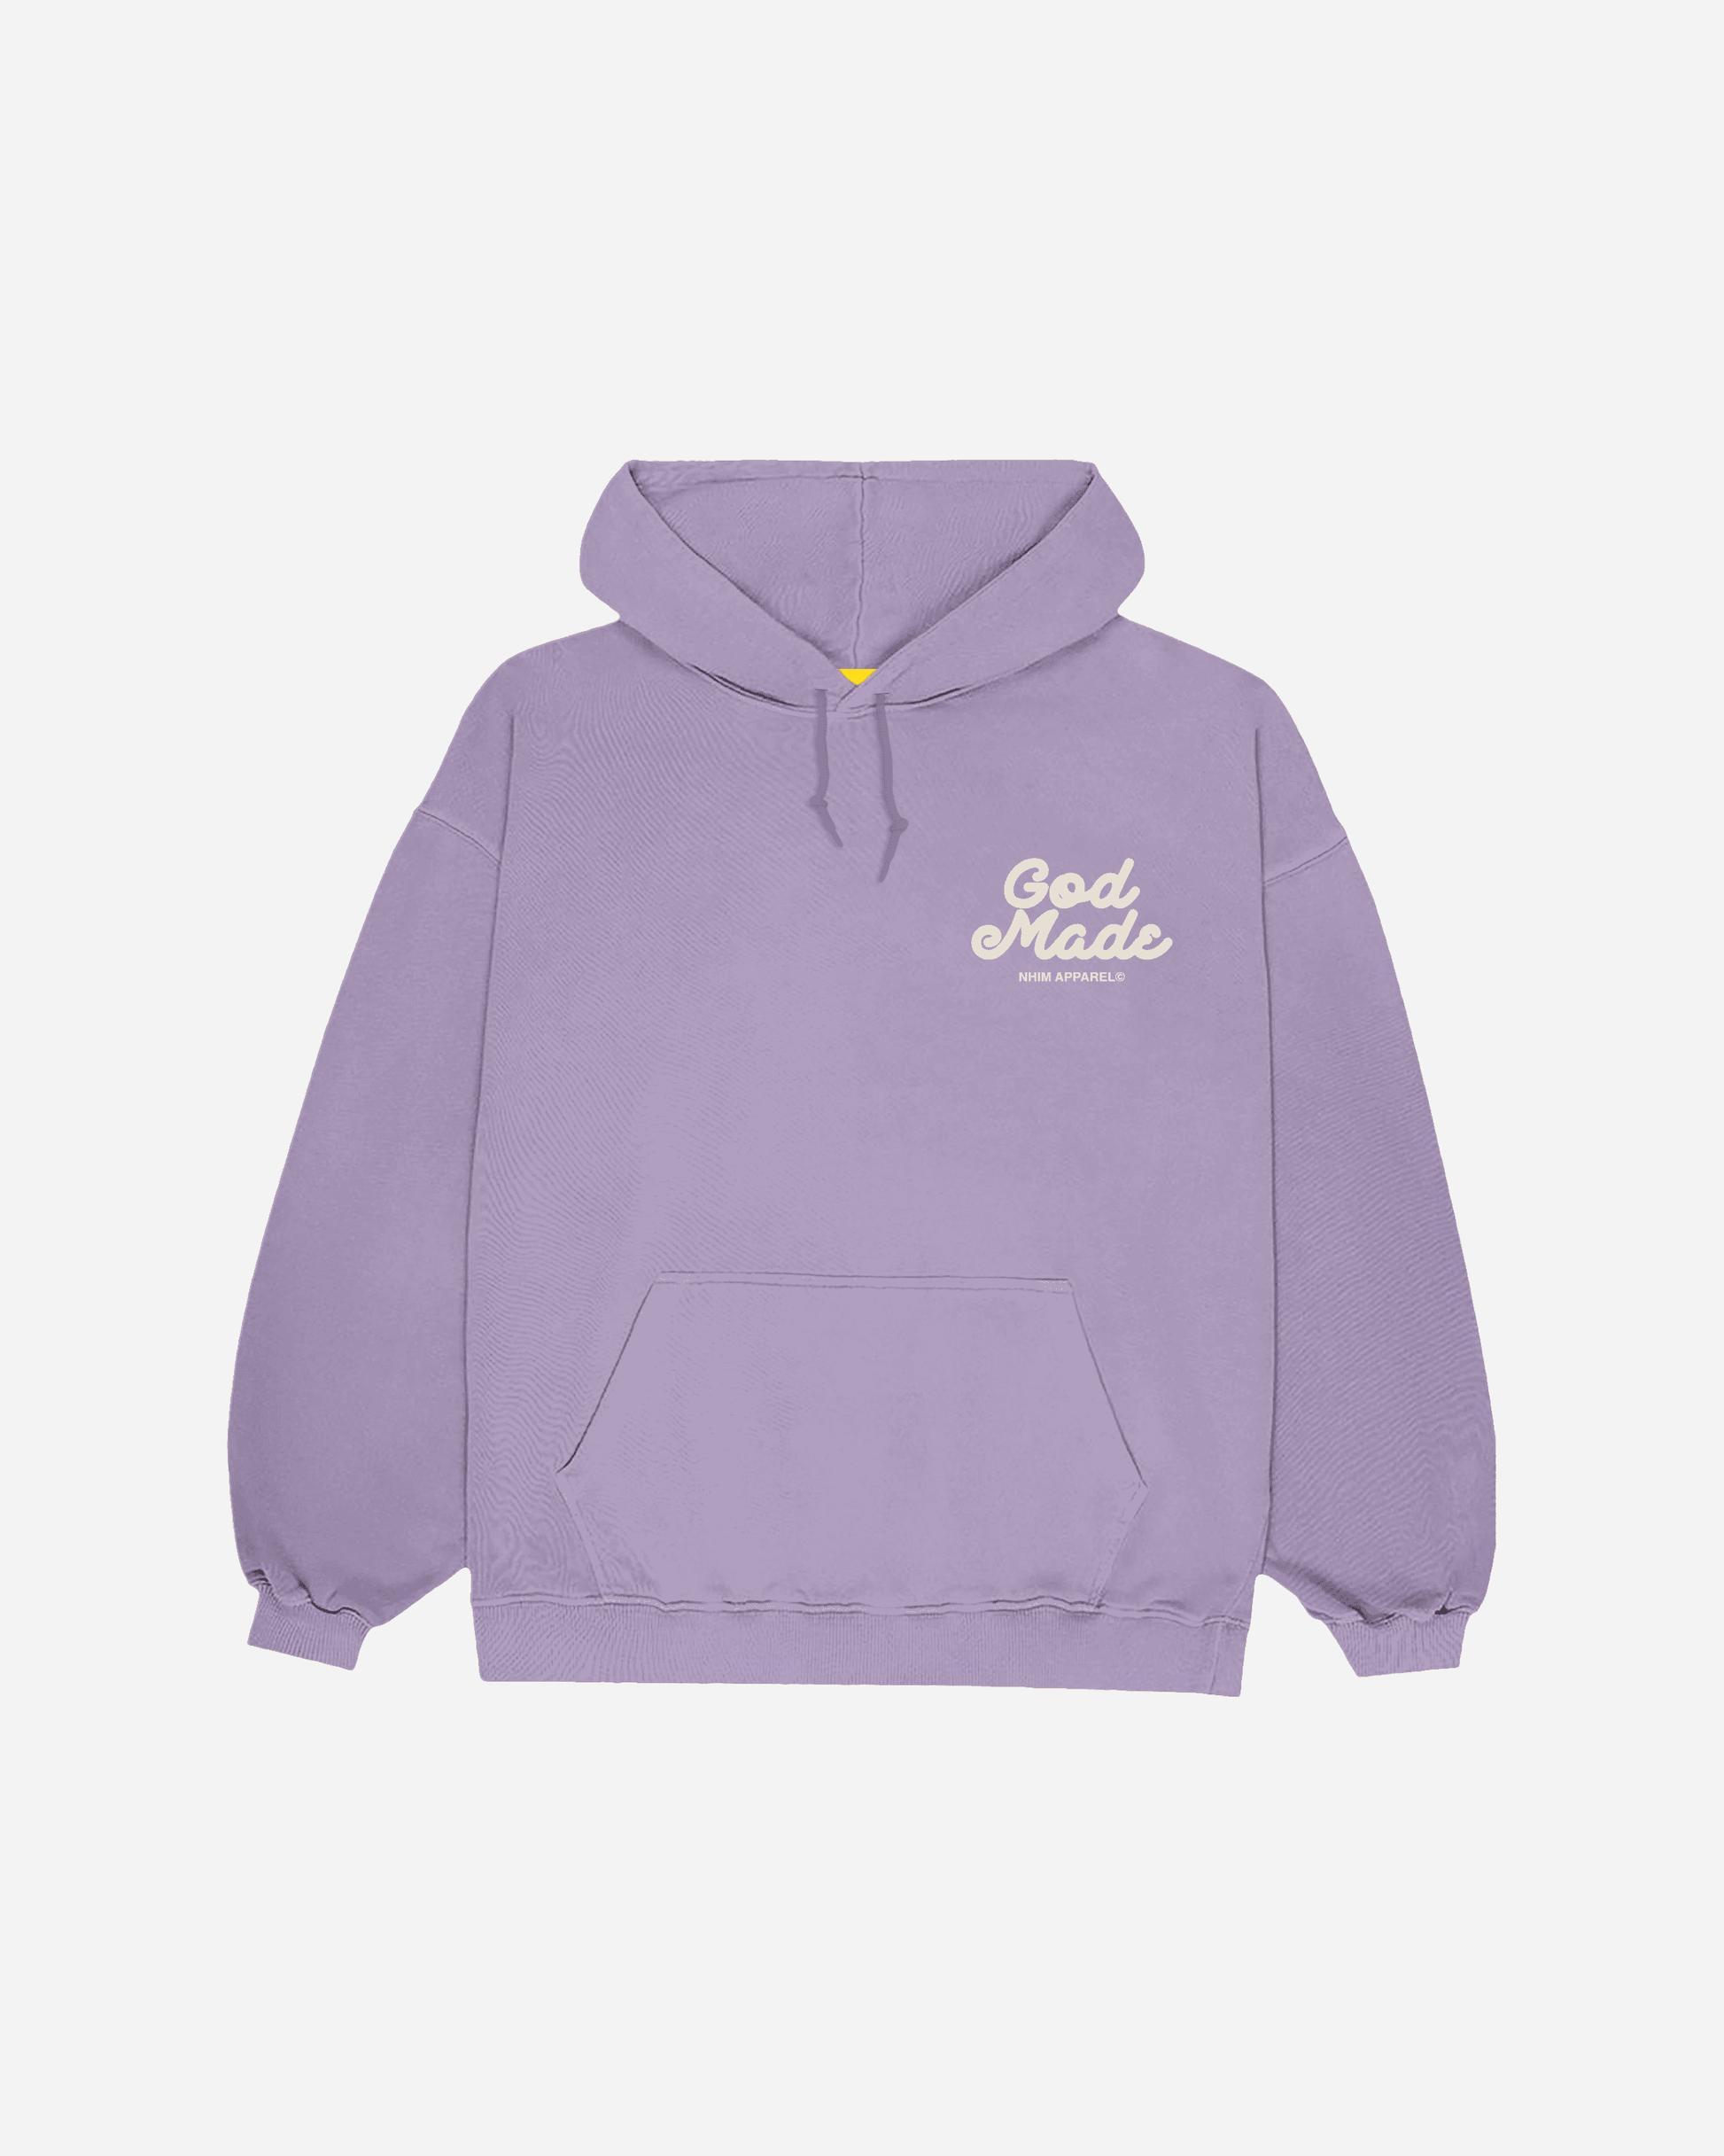 God Made lavender colored hooded sweatshirt with white graphic made by NHIM APPAREL christian clothing brand